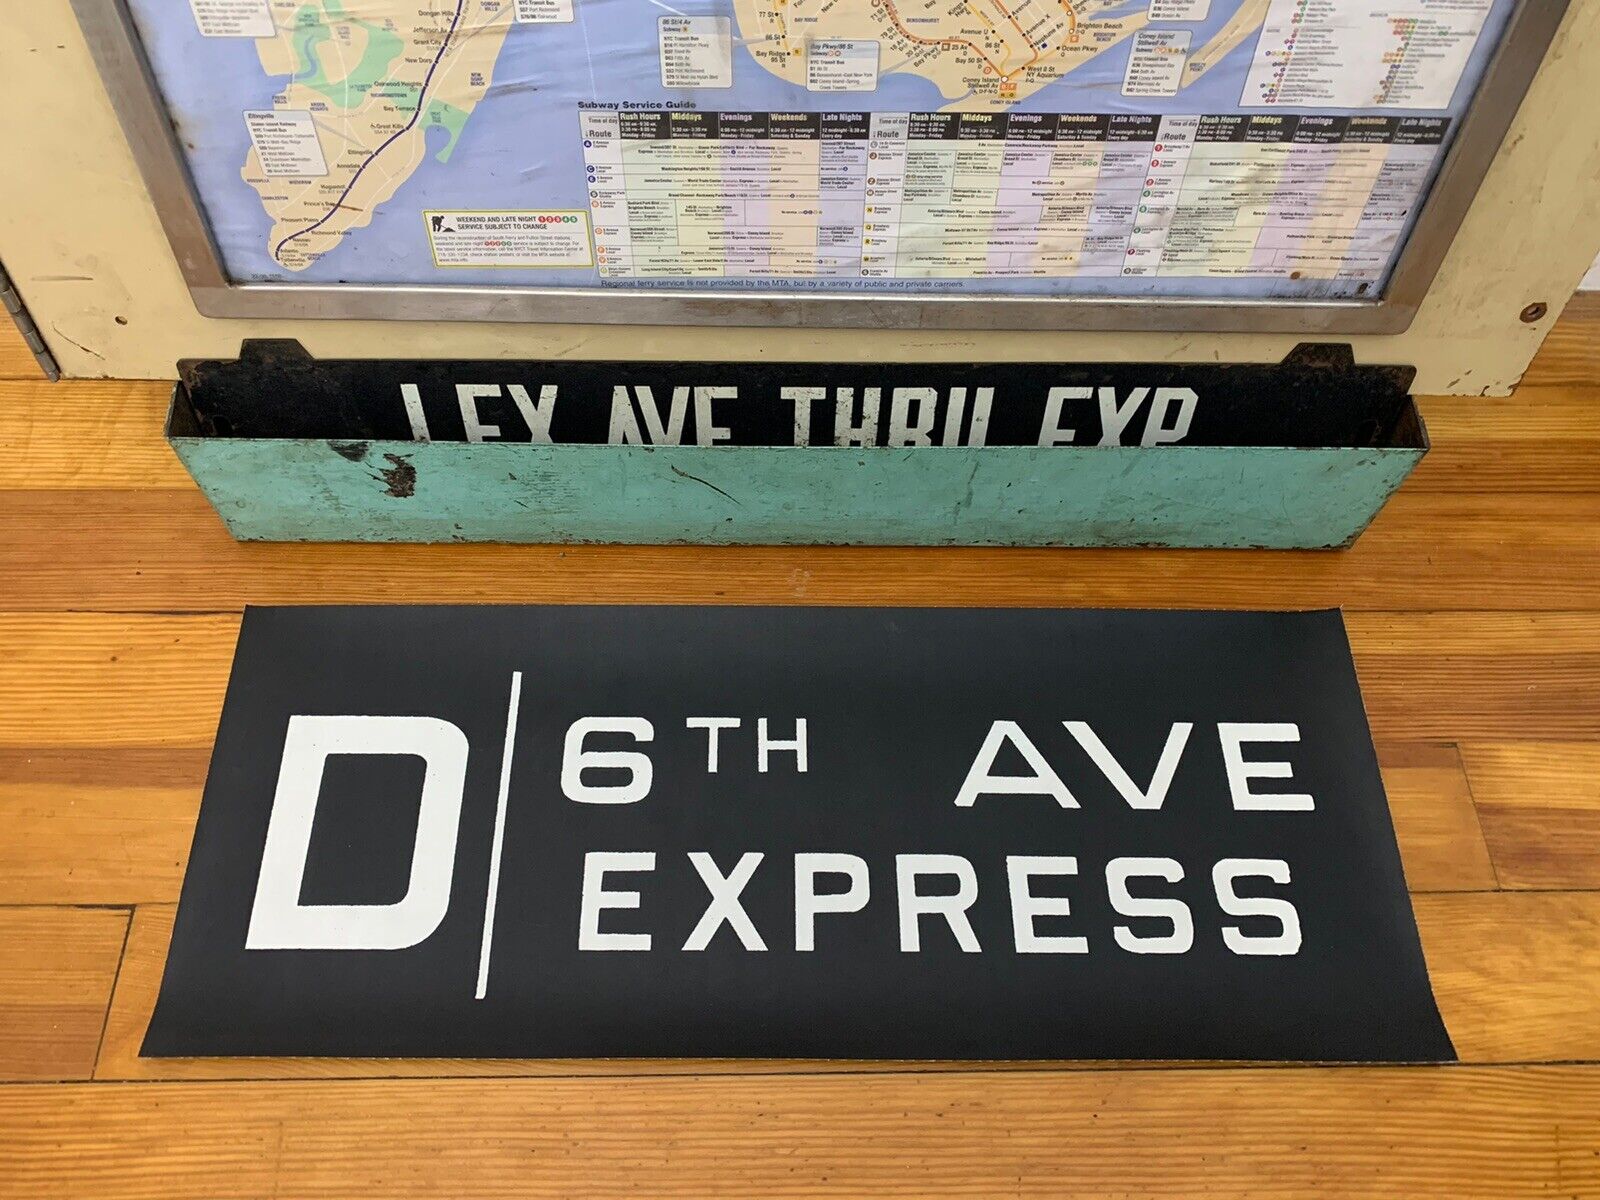 NYC SUBWAY ROLL SIGN D 6th AVENUE EXPRESS CANAL STREET TRIBECA GARMENT DISTRICT